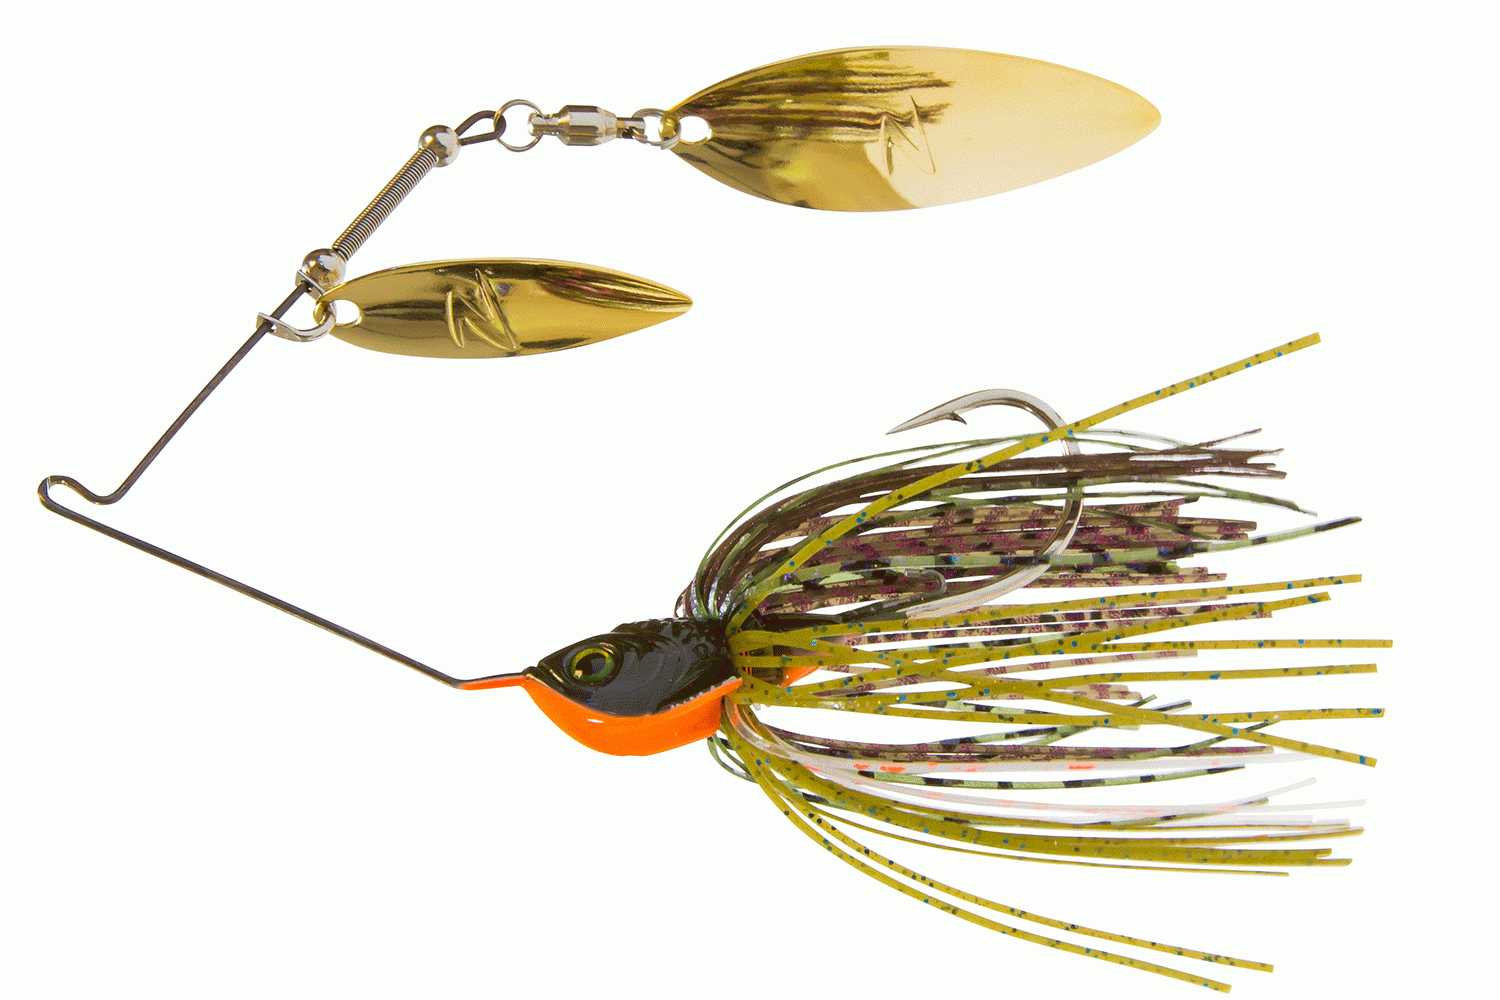 <p><b>Z-Man SlingBladeZ, $7.99-$8.99</b></p> Armed with a collection of subtle yet super-intelligent features, the Z-Man SlingBladeZ spinnerbait boasts two primary talents: Deep, palpable vibrations and exceptional lure balance across the full spectrum of retrieve speeds. Riding on the SlingBladeZâs low-vis LiveWire frame, double willow or tandem willow-Colorado blades are each stamped from custom dies and electroplated with a jeweler-quality finish.<br> <a href=